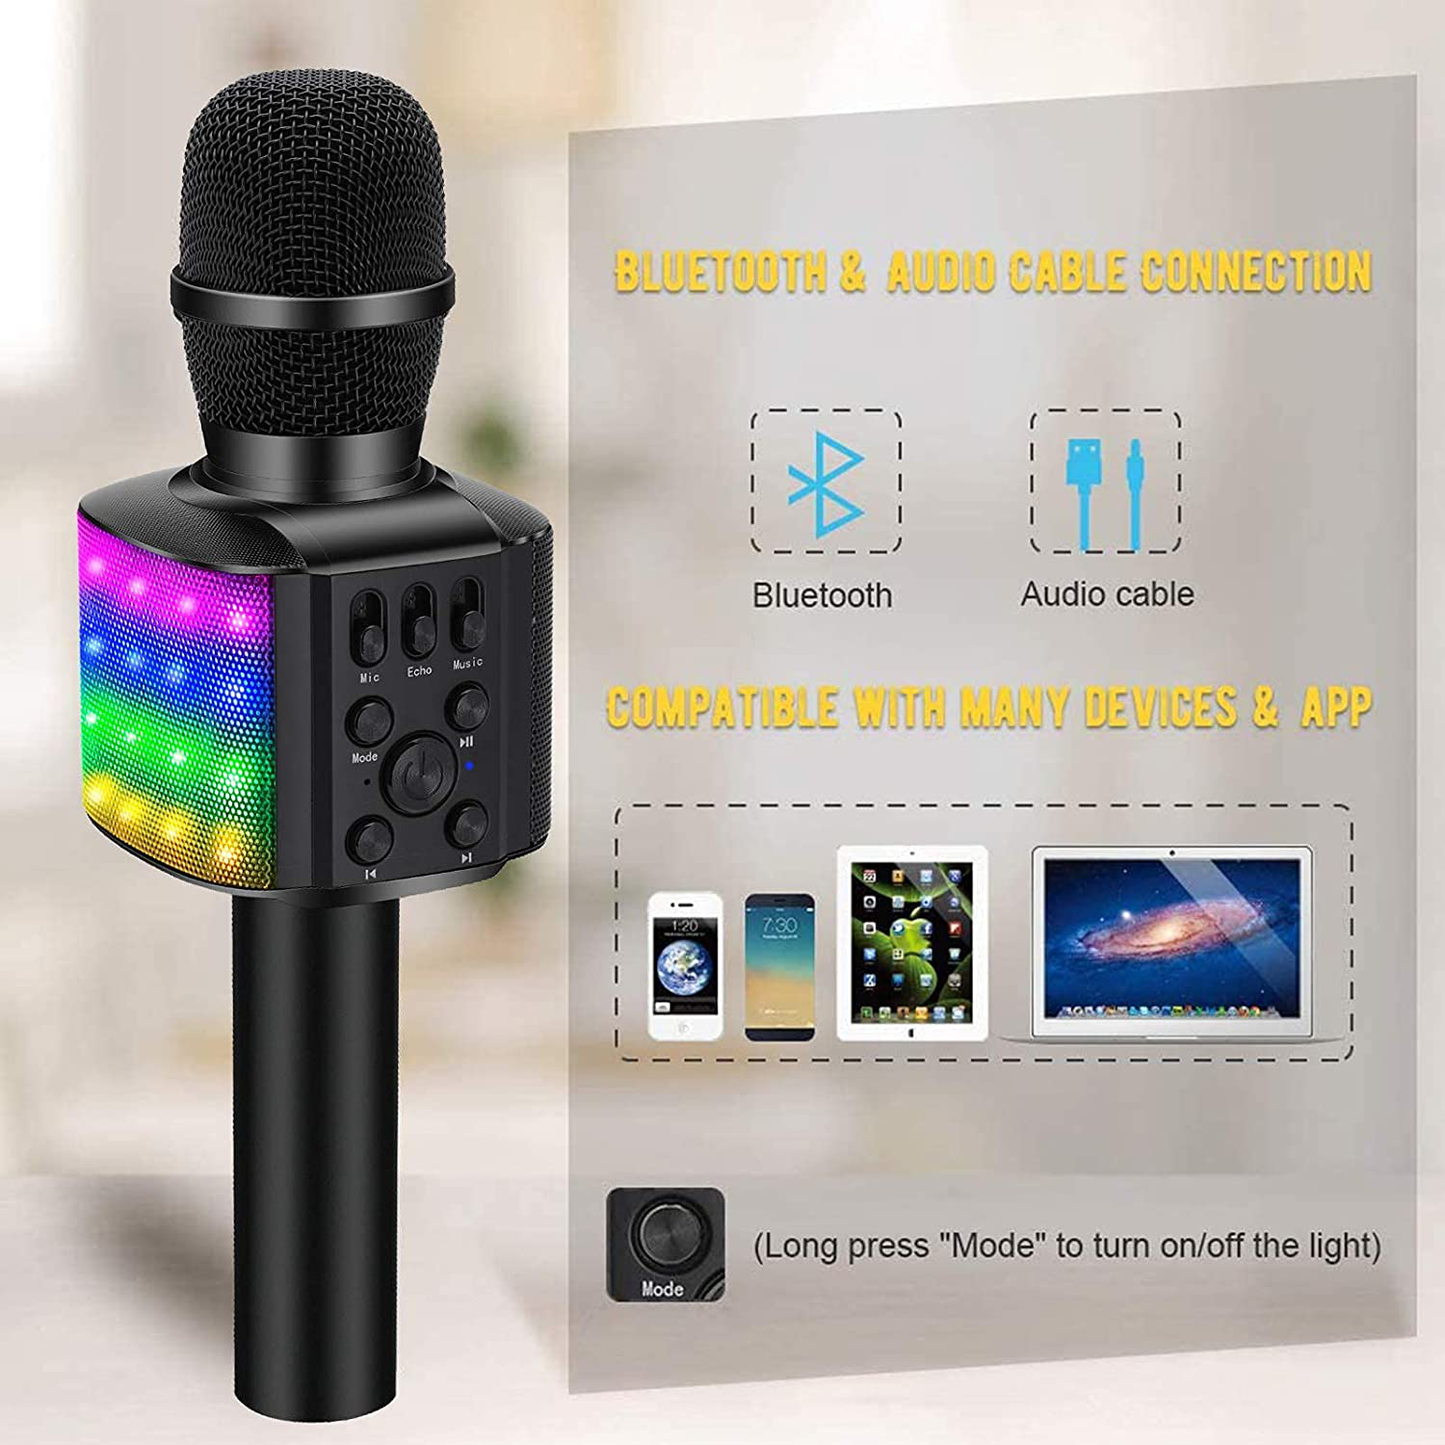 BONAOK Wireless Bluetooth Karaoke Microphone with controllable LED Lights, 4 in 1 Portable Karaoke Machine Mic Speaker Birthday Home Party for All Smartphones PC(Q36 Rose Gold)